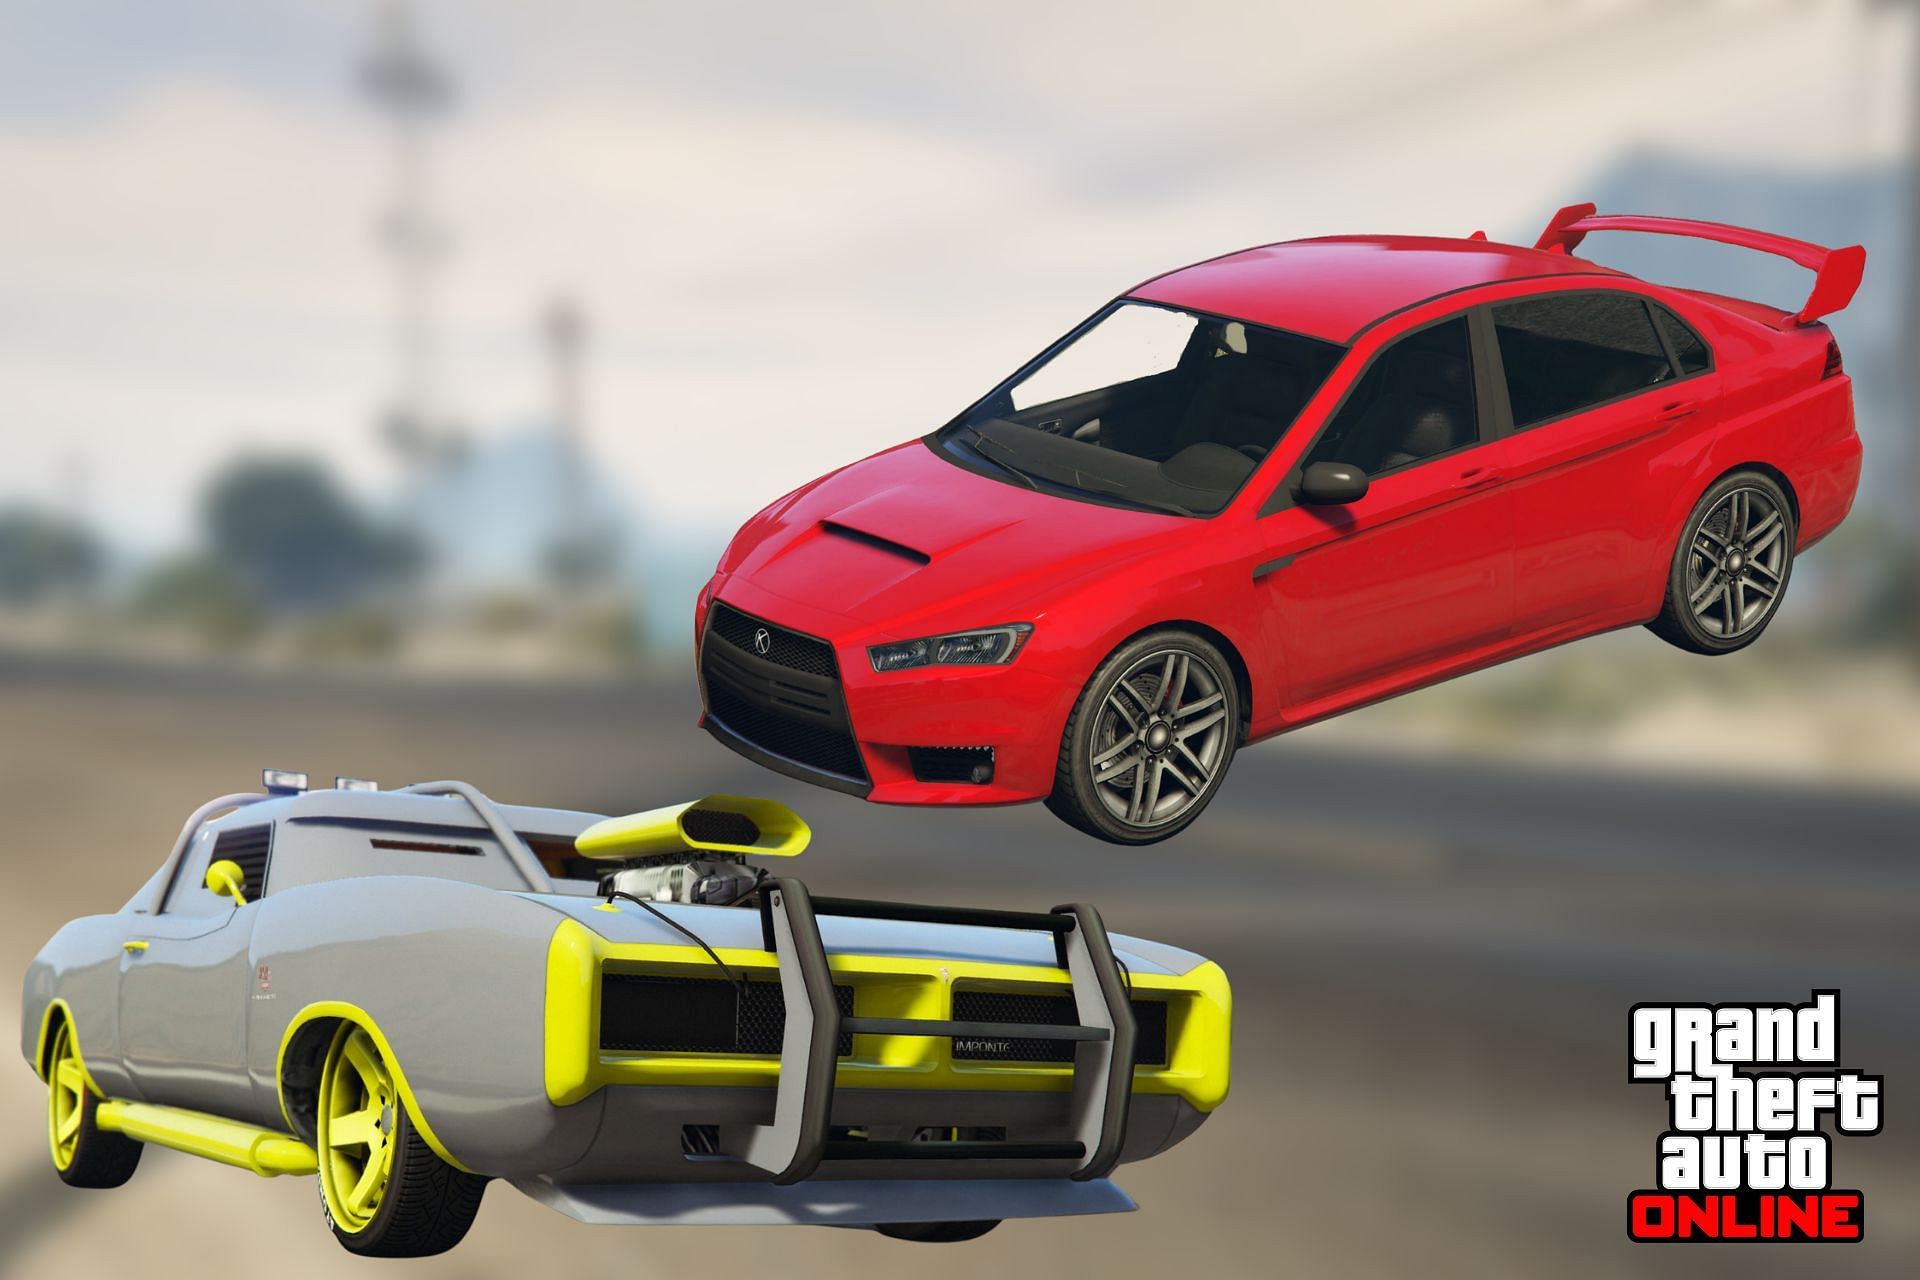 5 most useful GTA Online vehicles for beginners